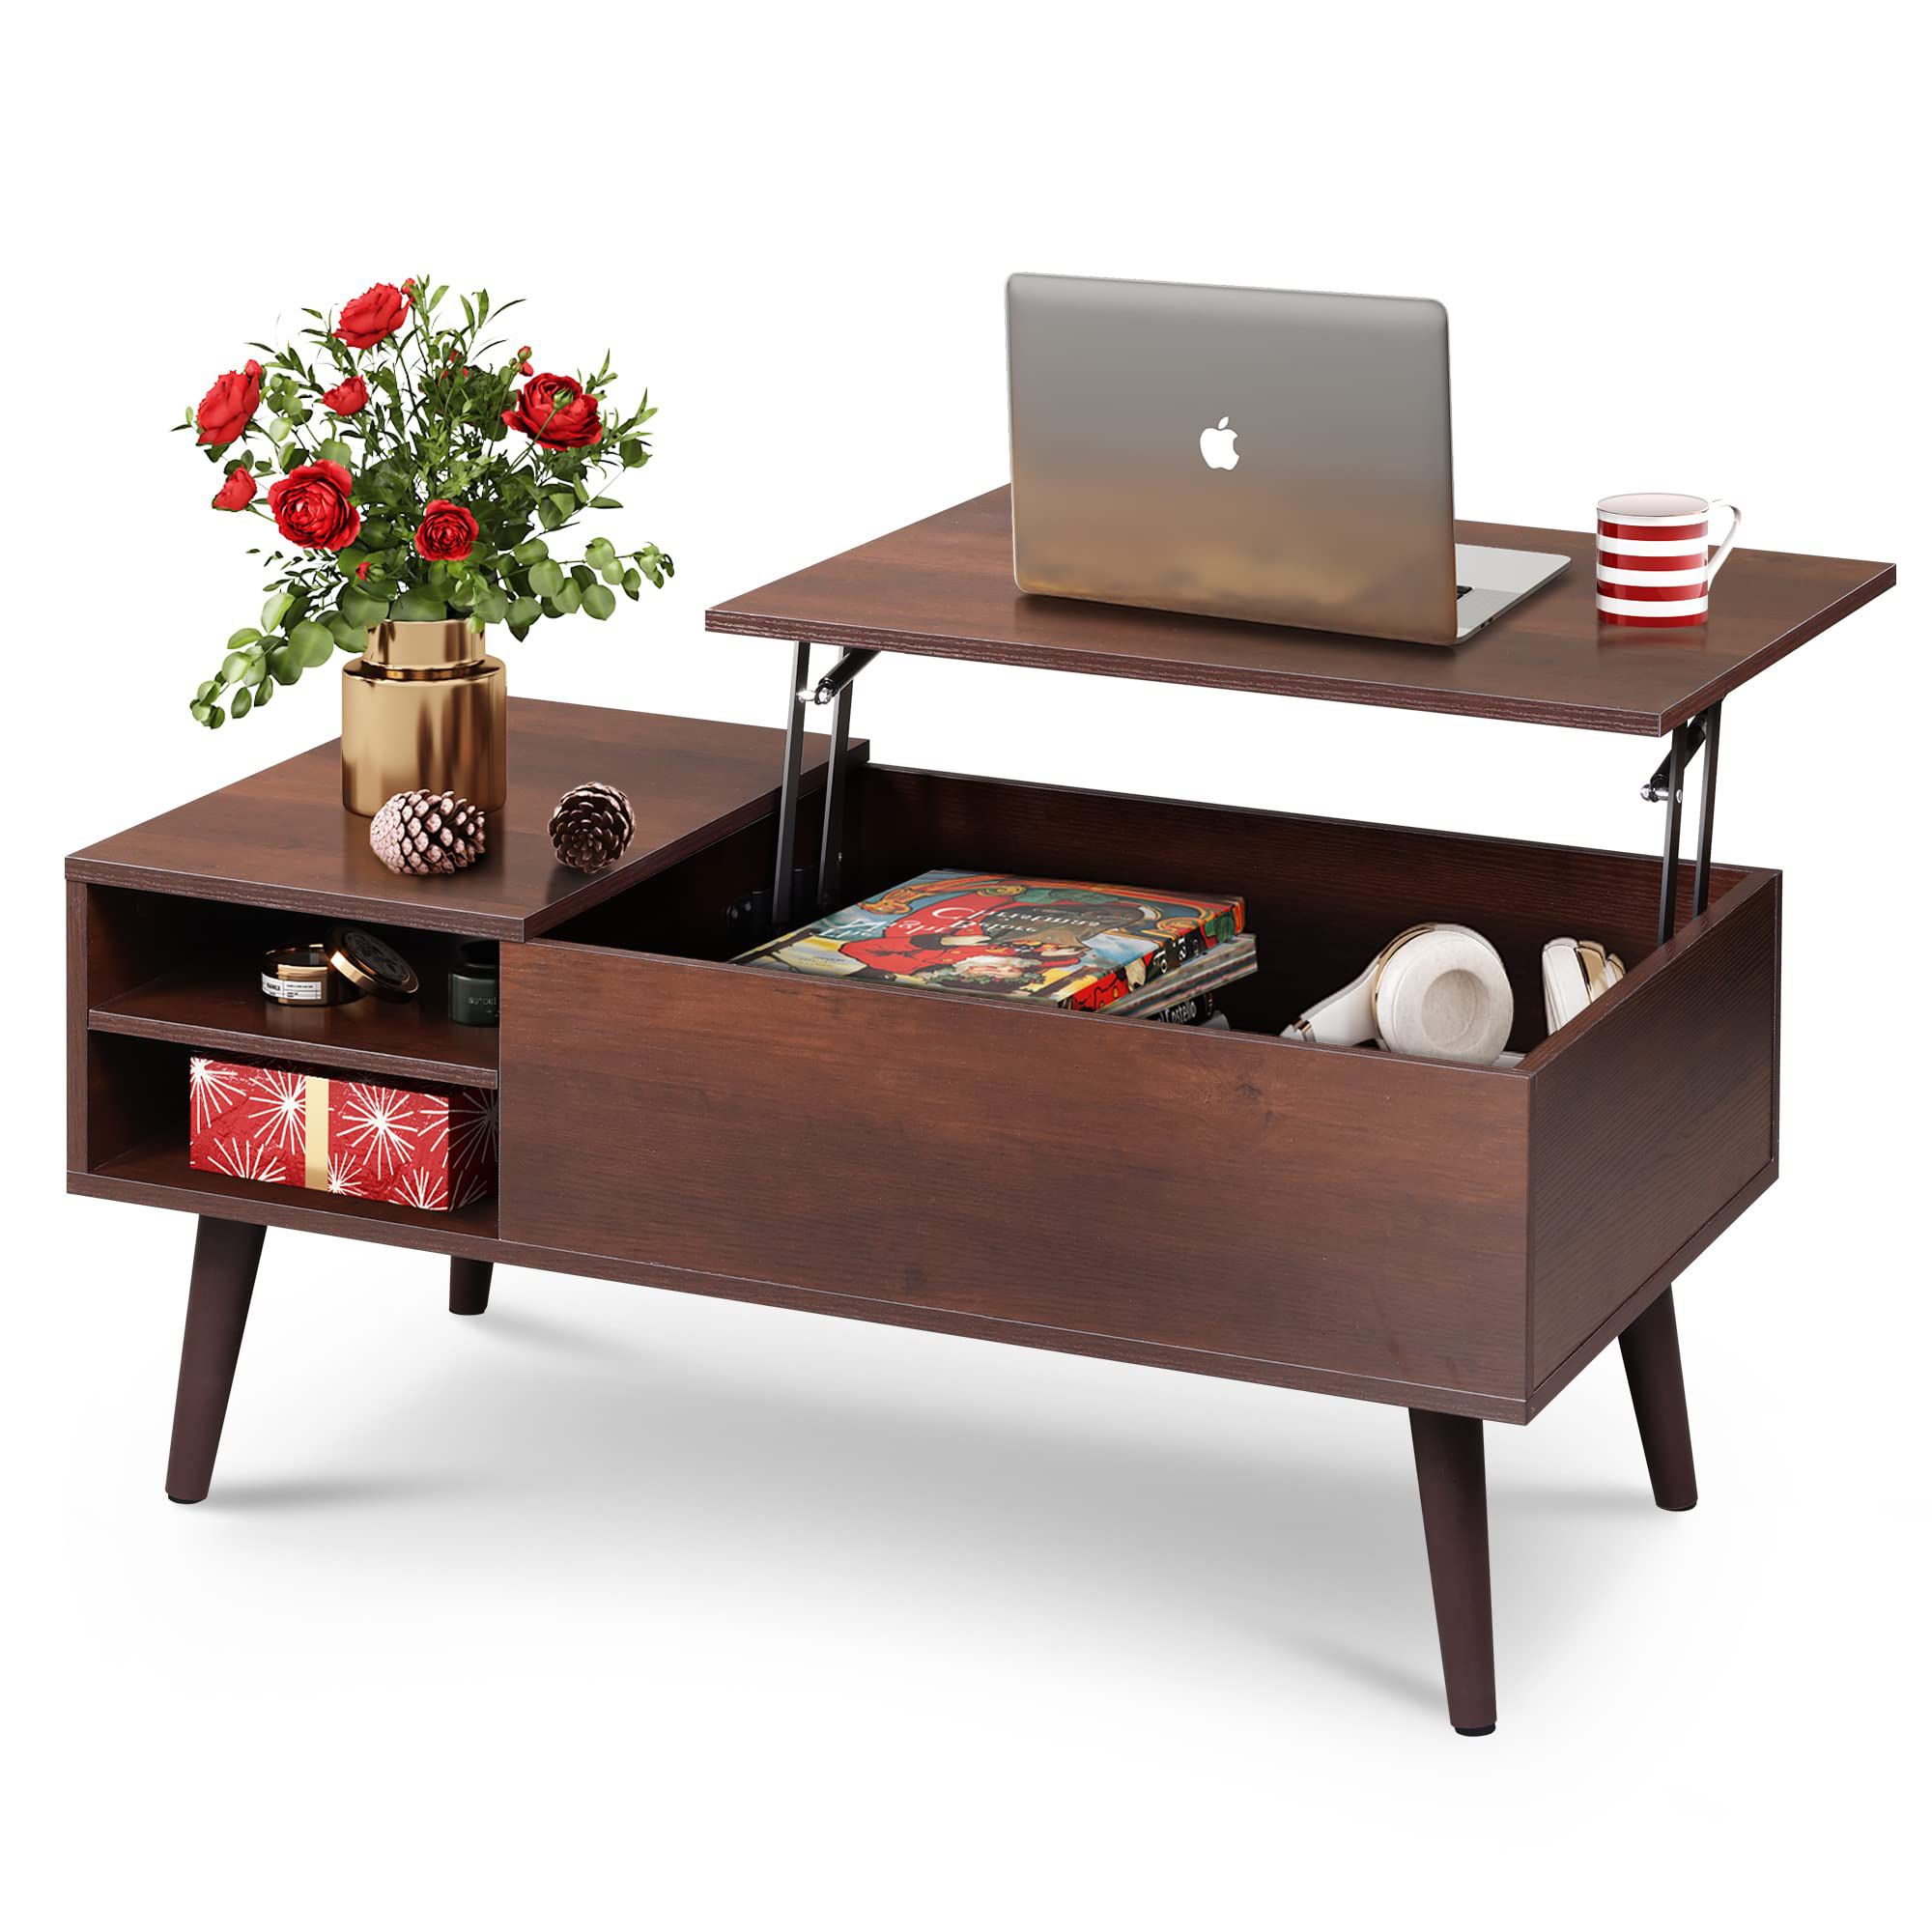 WLIVE Lift Top Coffee Table